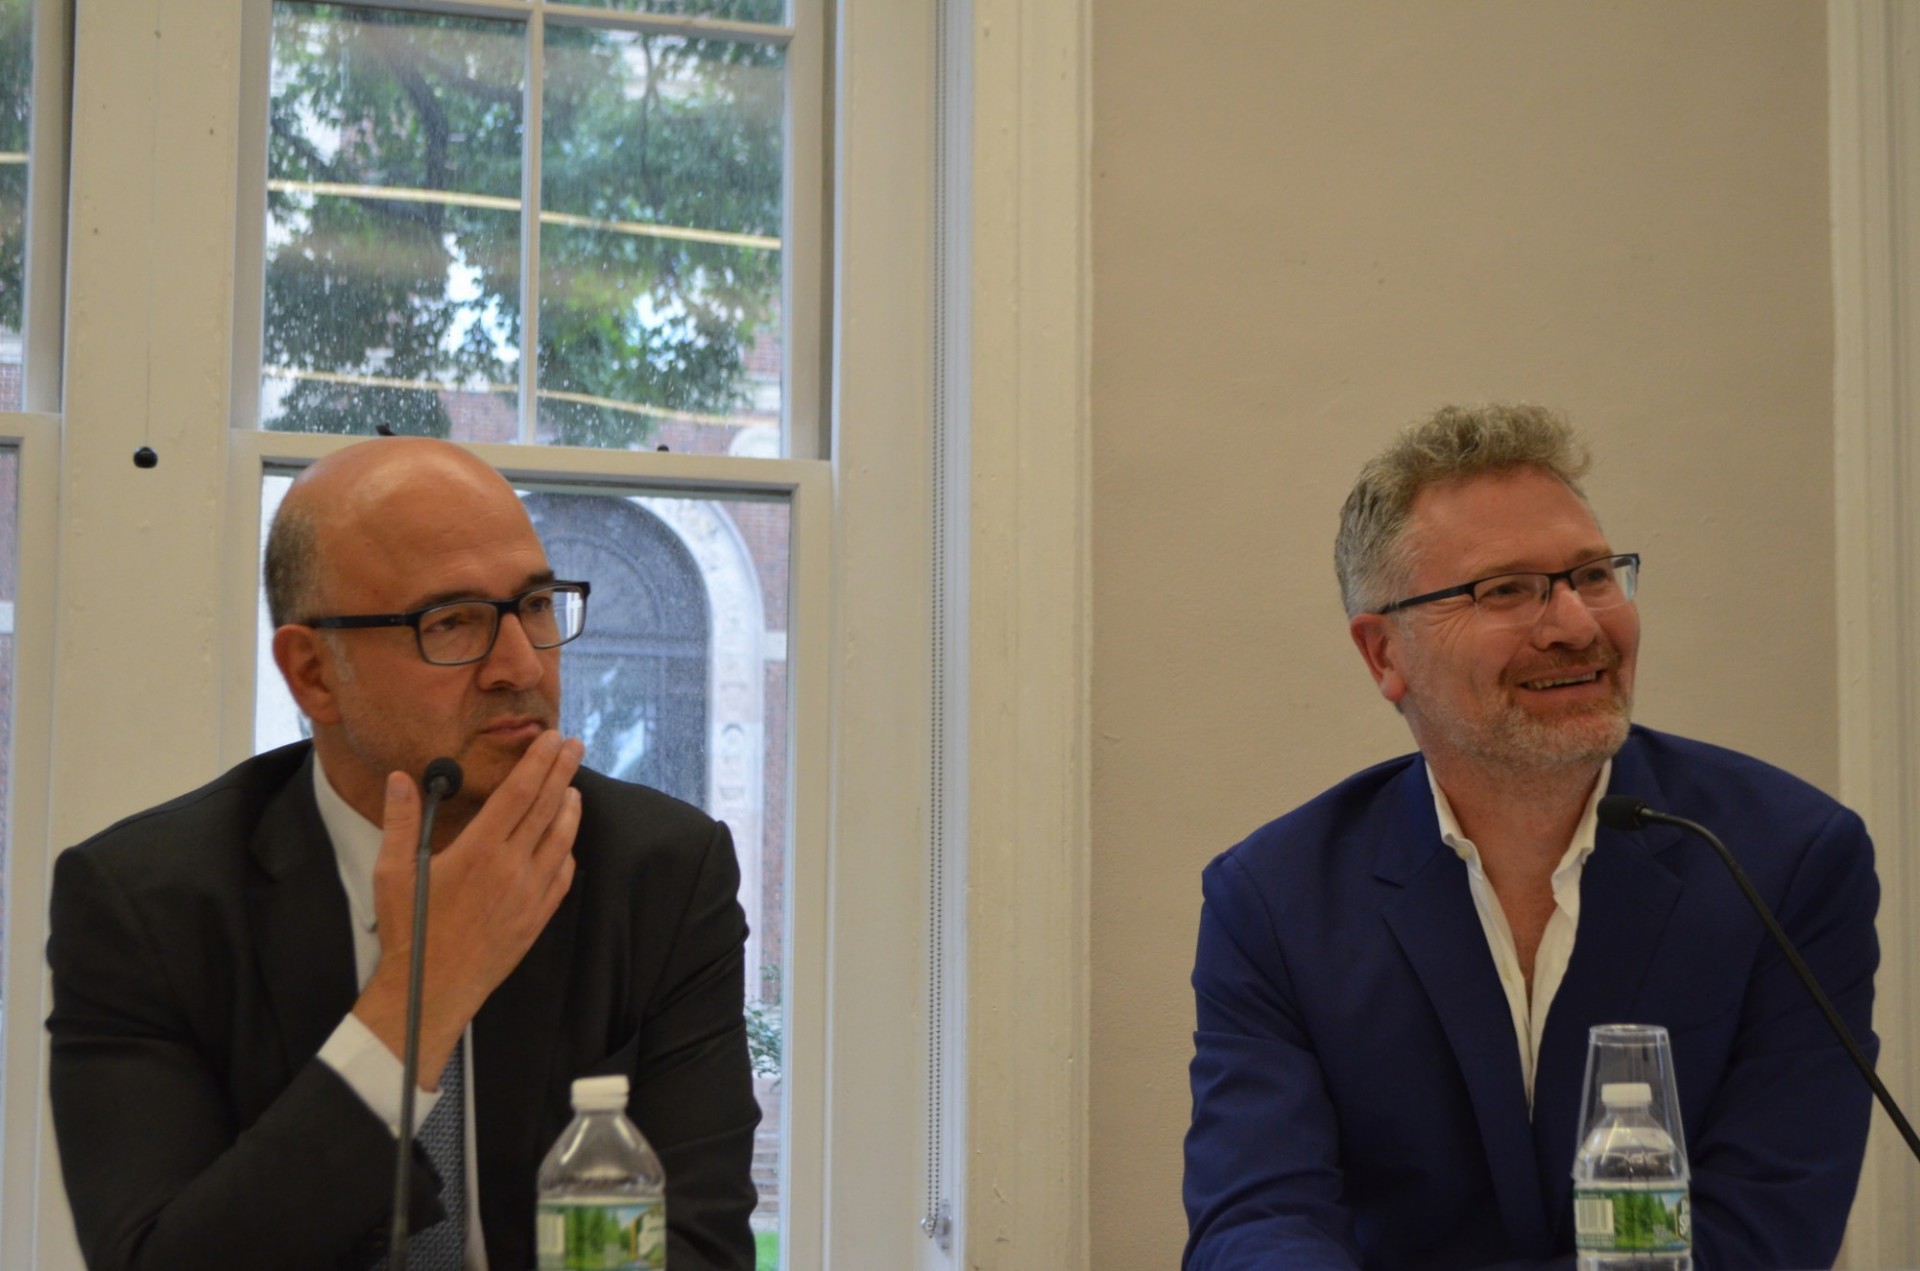 Pierre Moscovici and Adam Tooze listen to a question from the audience